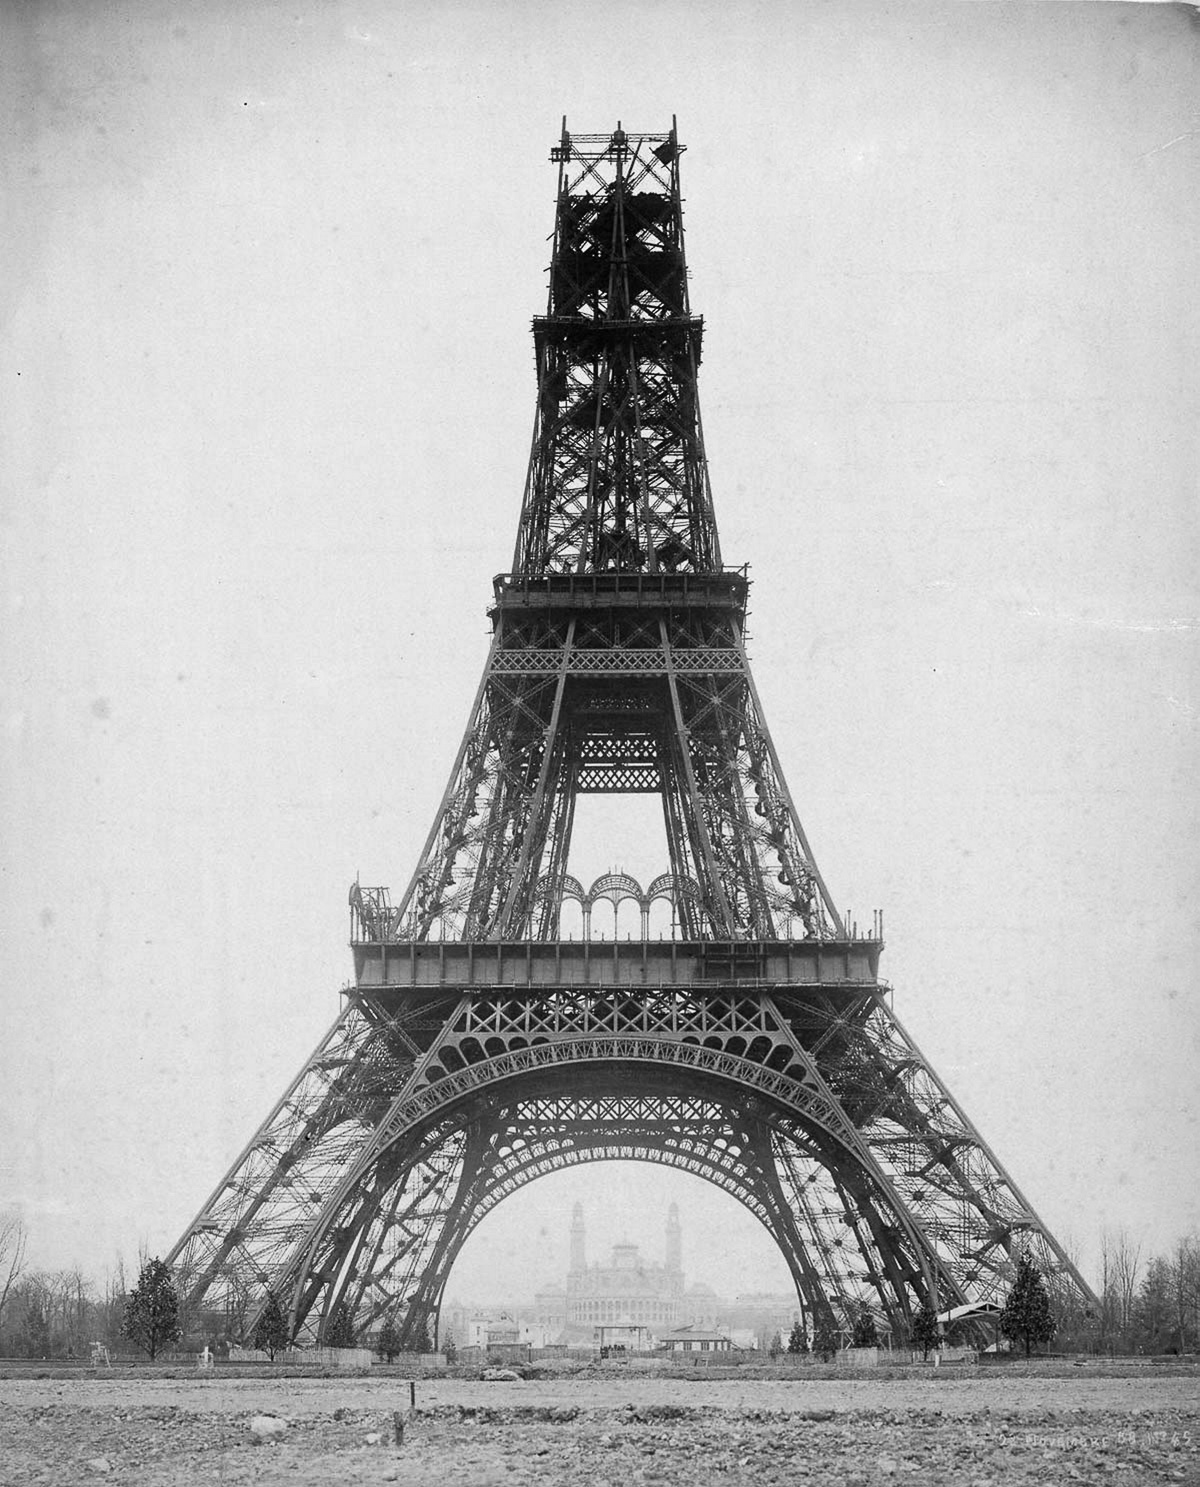 The Eiffel Tower construction.